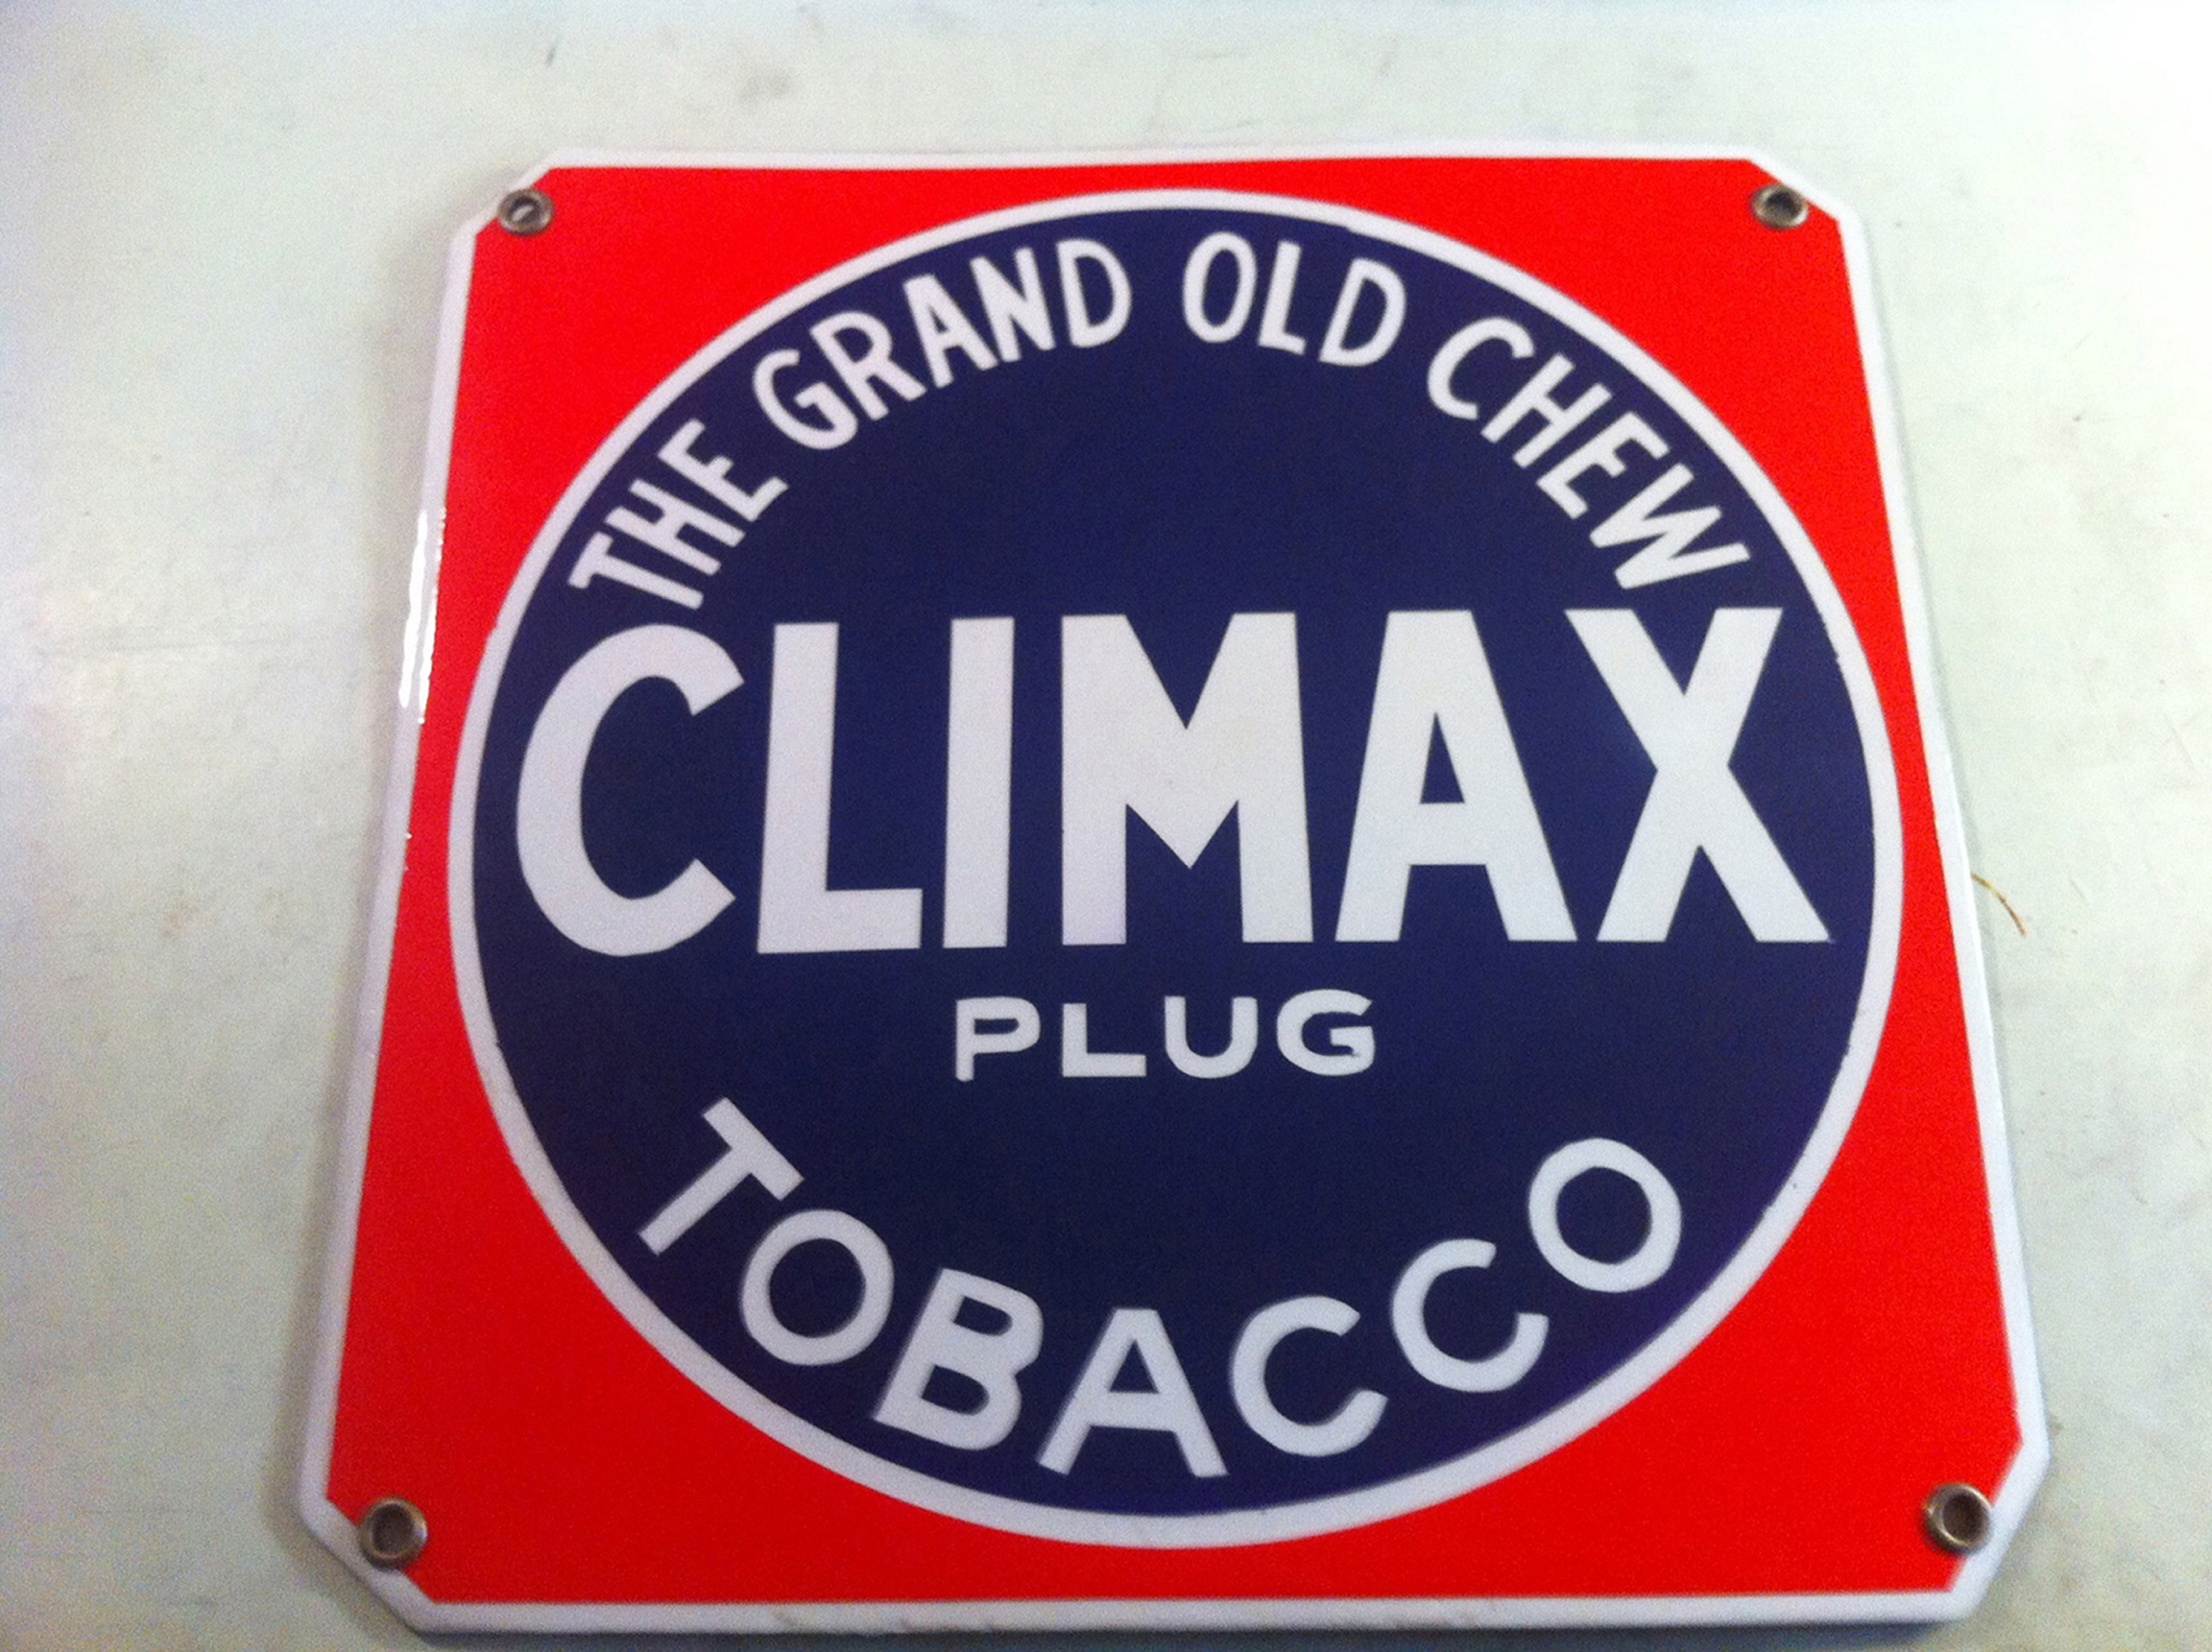 2010Gallery1/ClimaxTobacco2After.JPG